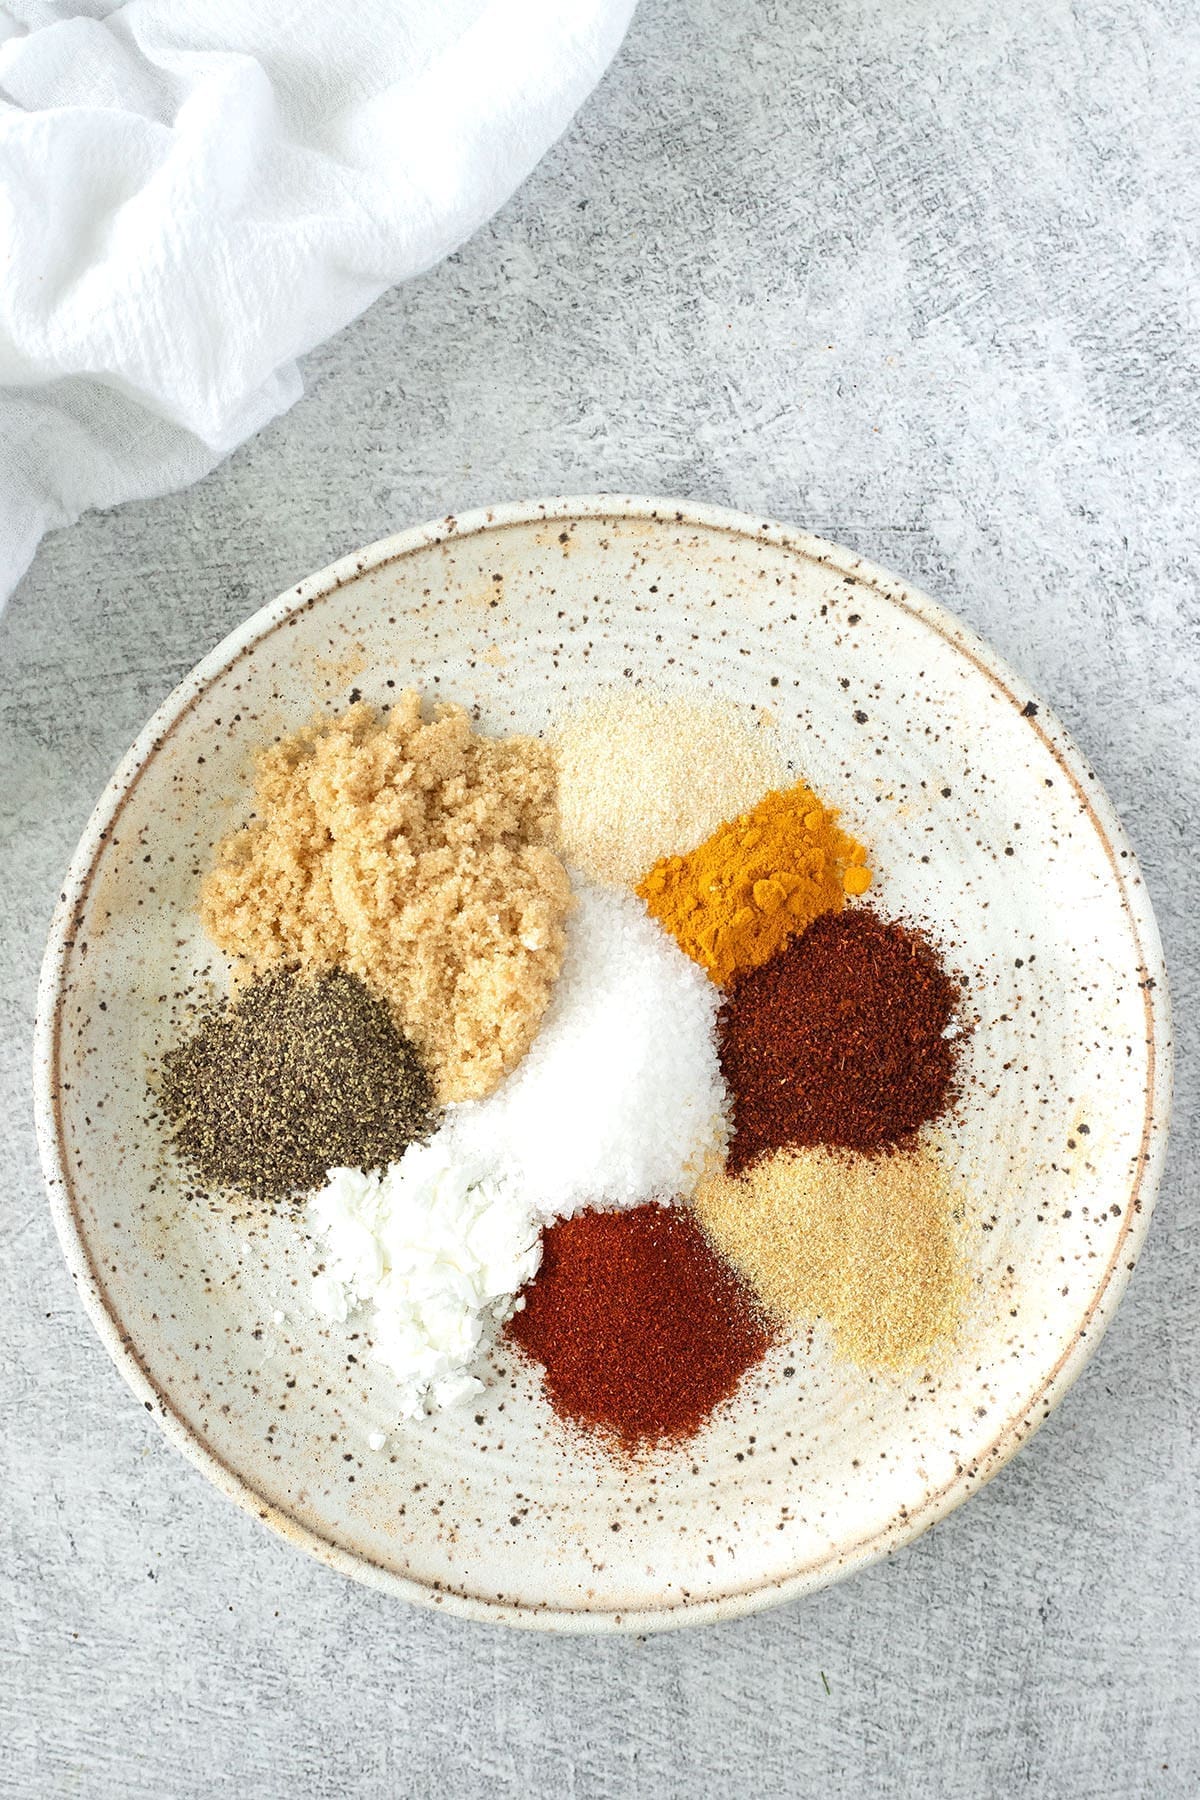 Variety of different spices spread out on a deckled plate.